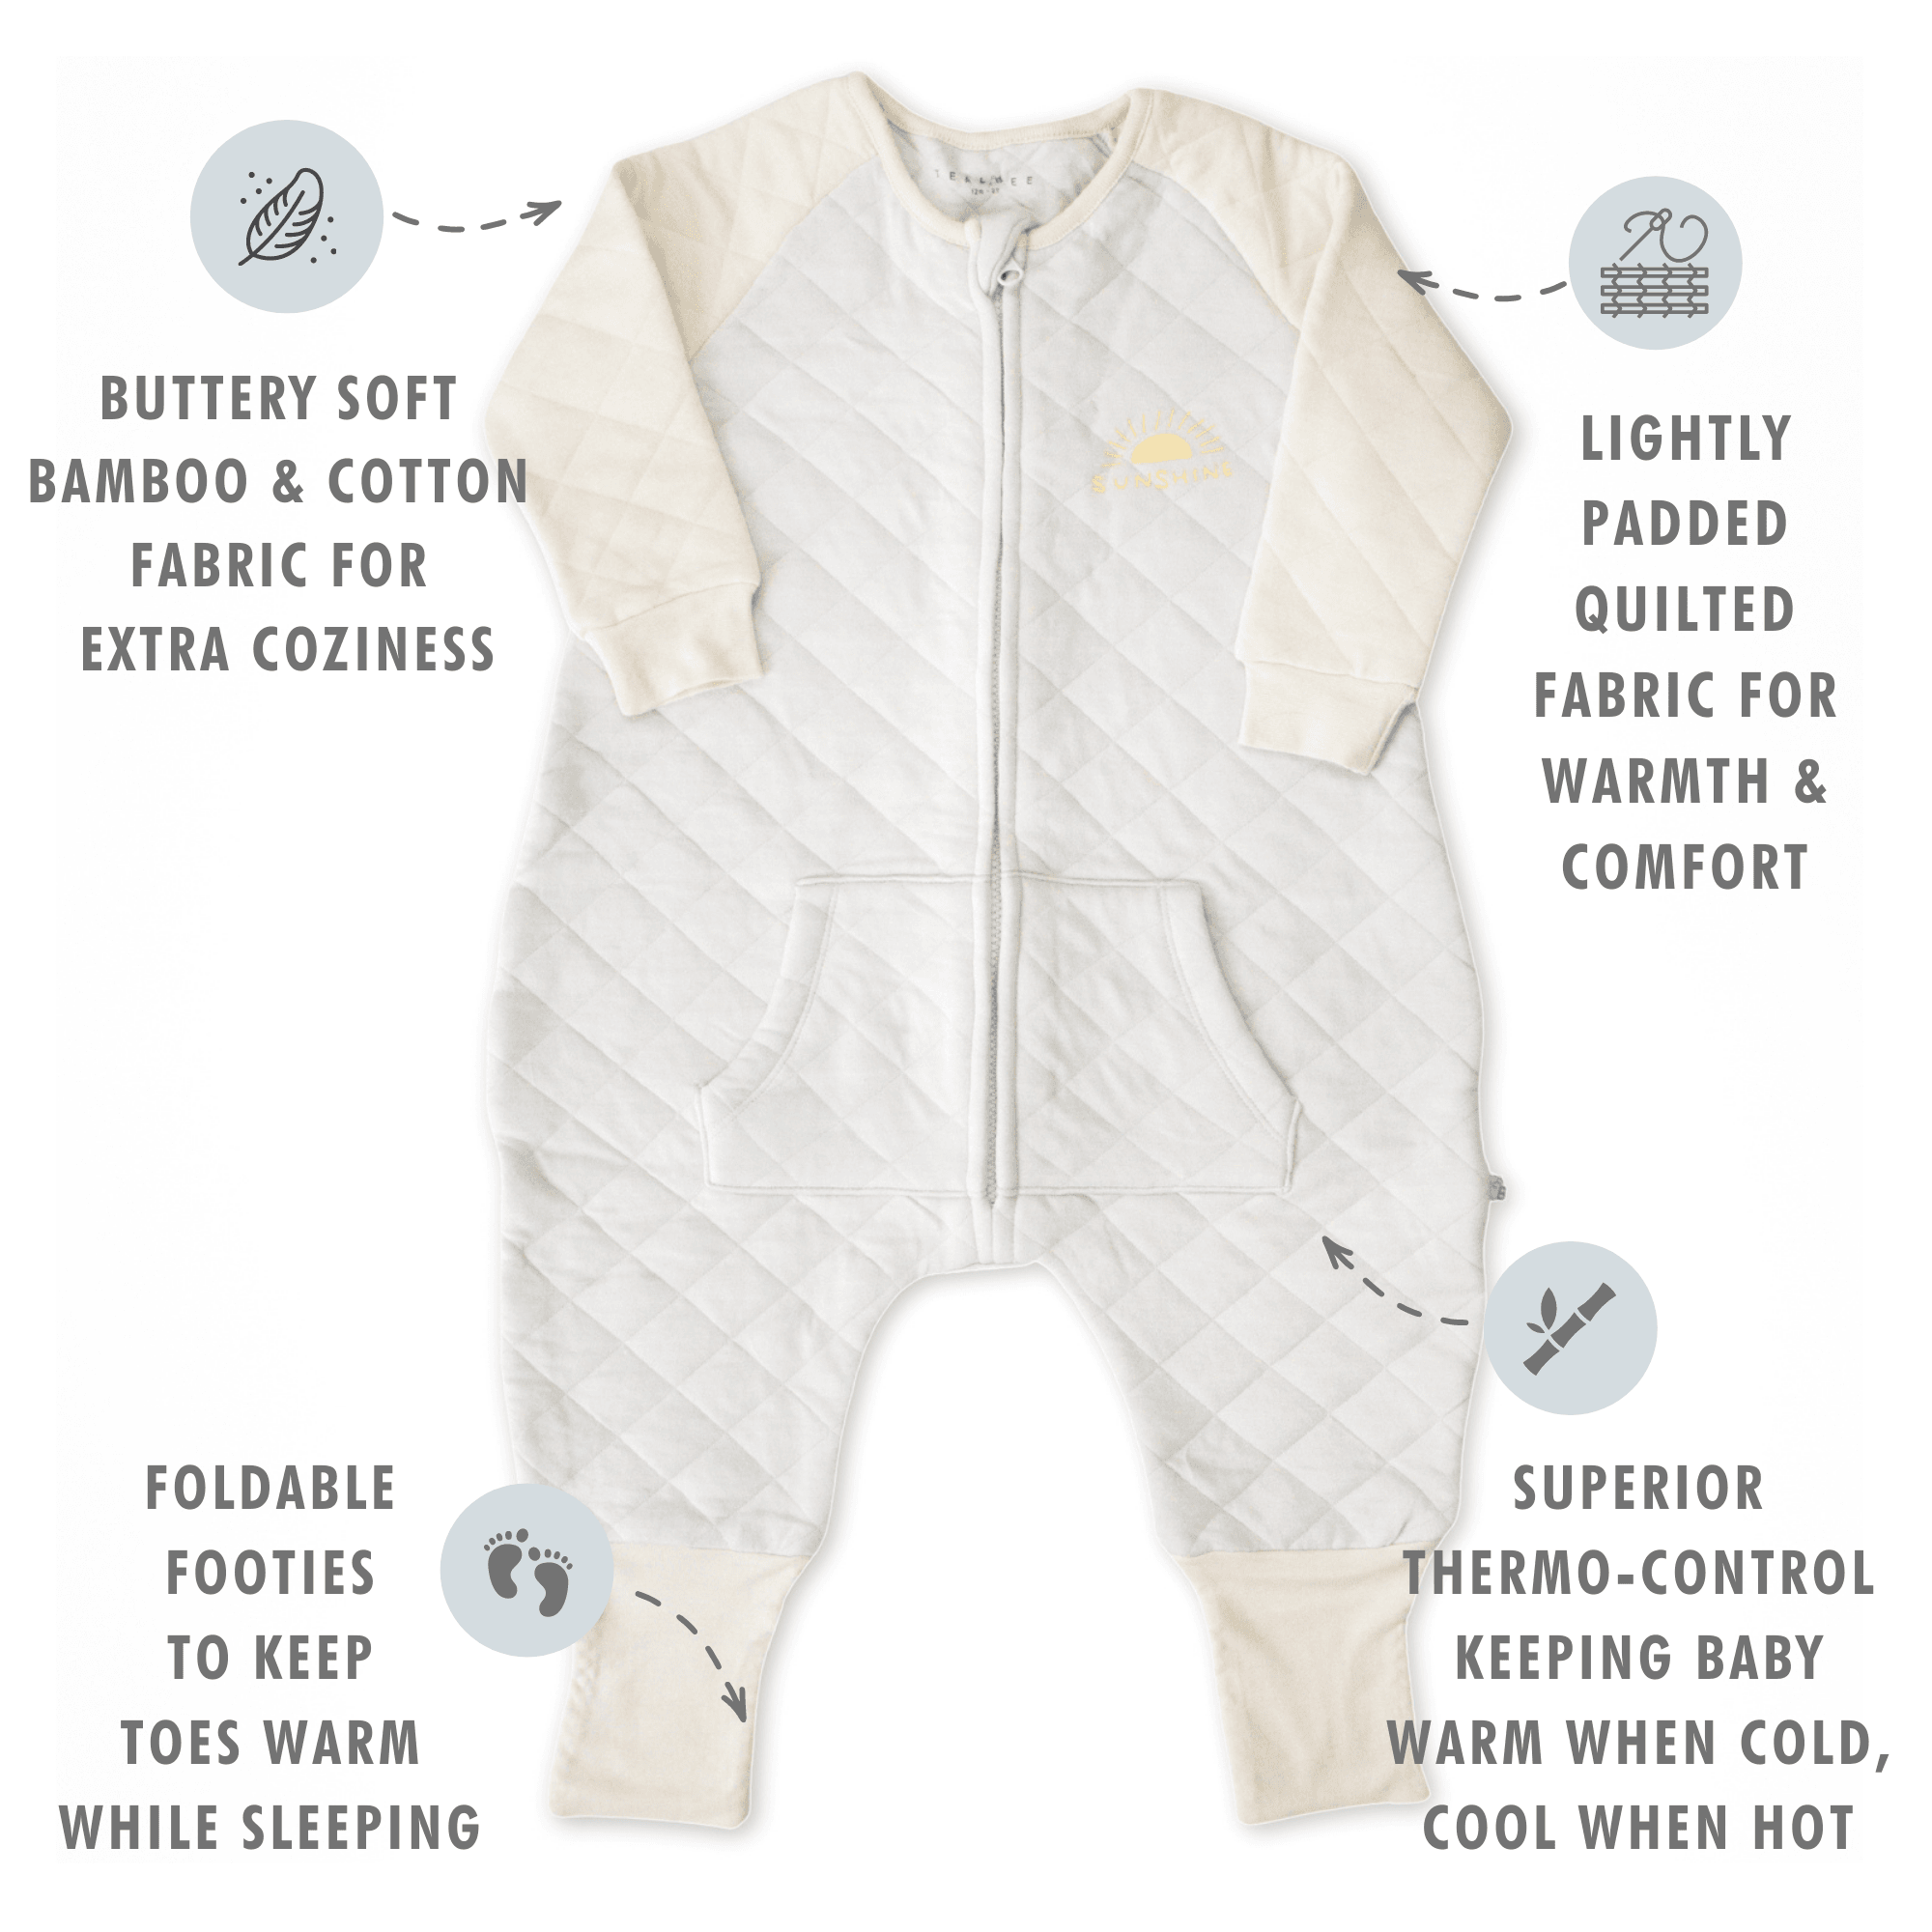 TEALBEE DREAMSIE - Buttery soft bamboo & cotton fabric for extra coziness, 0.8 TOG 3rd party tested warmth (64 - 69 F), Footies to keep toes warm, Superior thermo control keeping baby warm when cold, cool when hot.